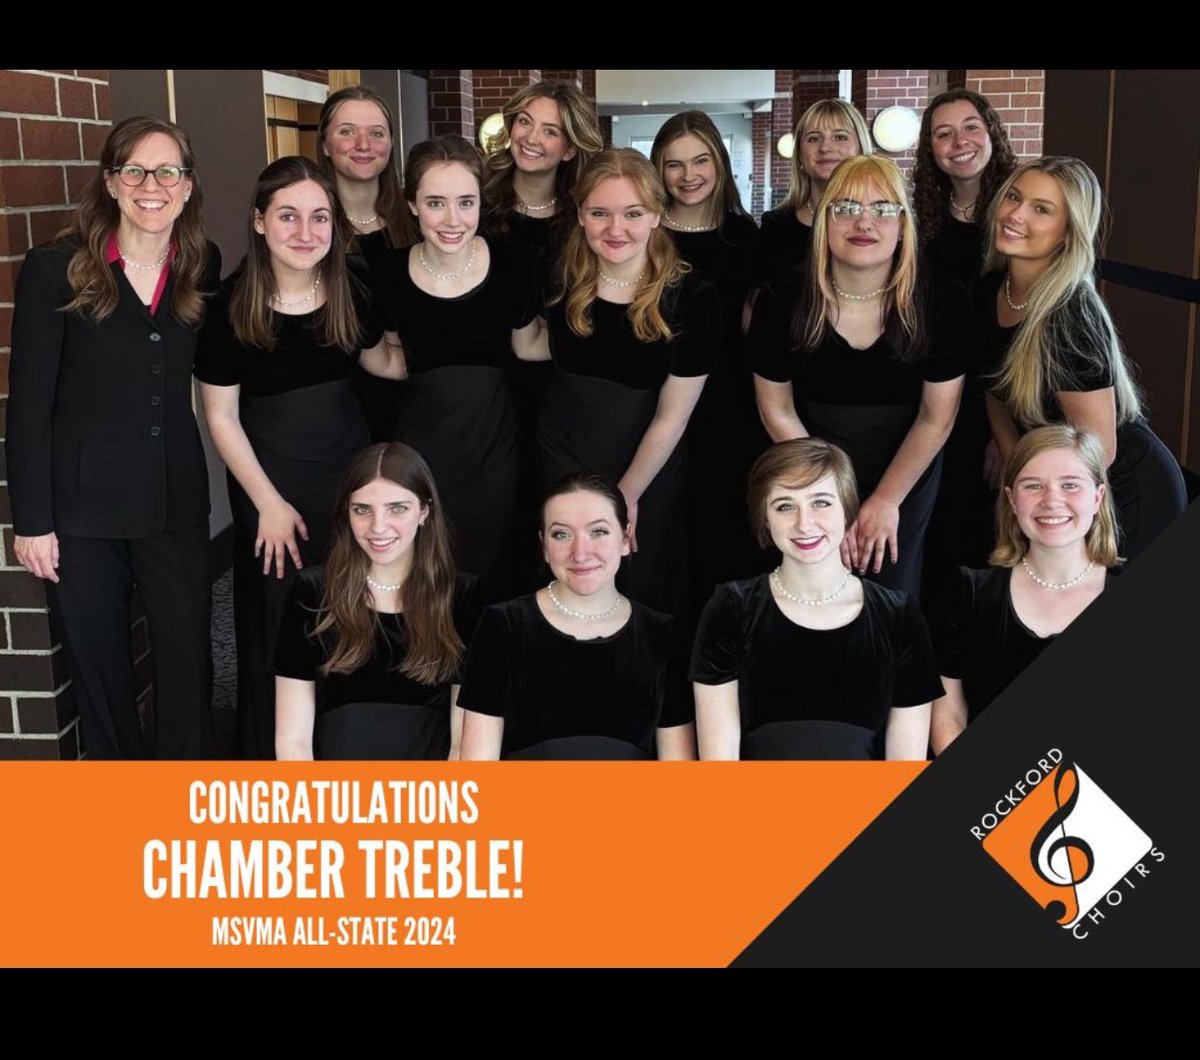 Congratulations to Rockford High School Chamber Treble for being selected to perform at the Michigan School Vocal Music Association All-State Recital! The top thirteen ensembles in the state of Michigan were selected by a blind listening panel for this distinction. #RamPride